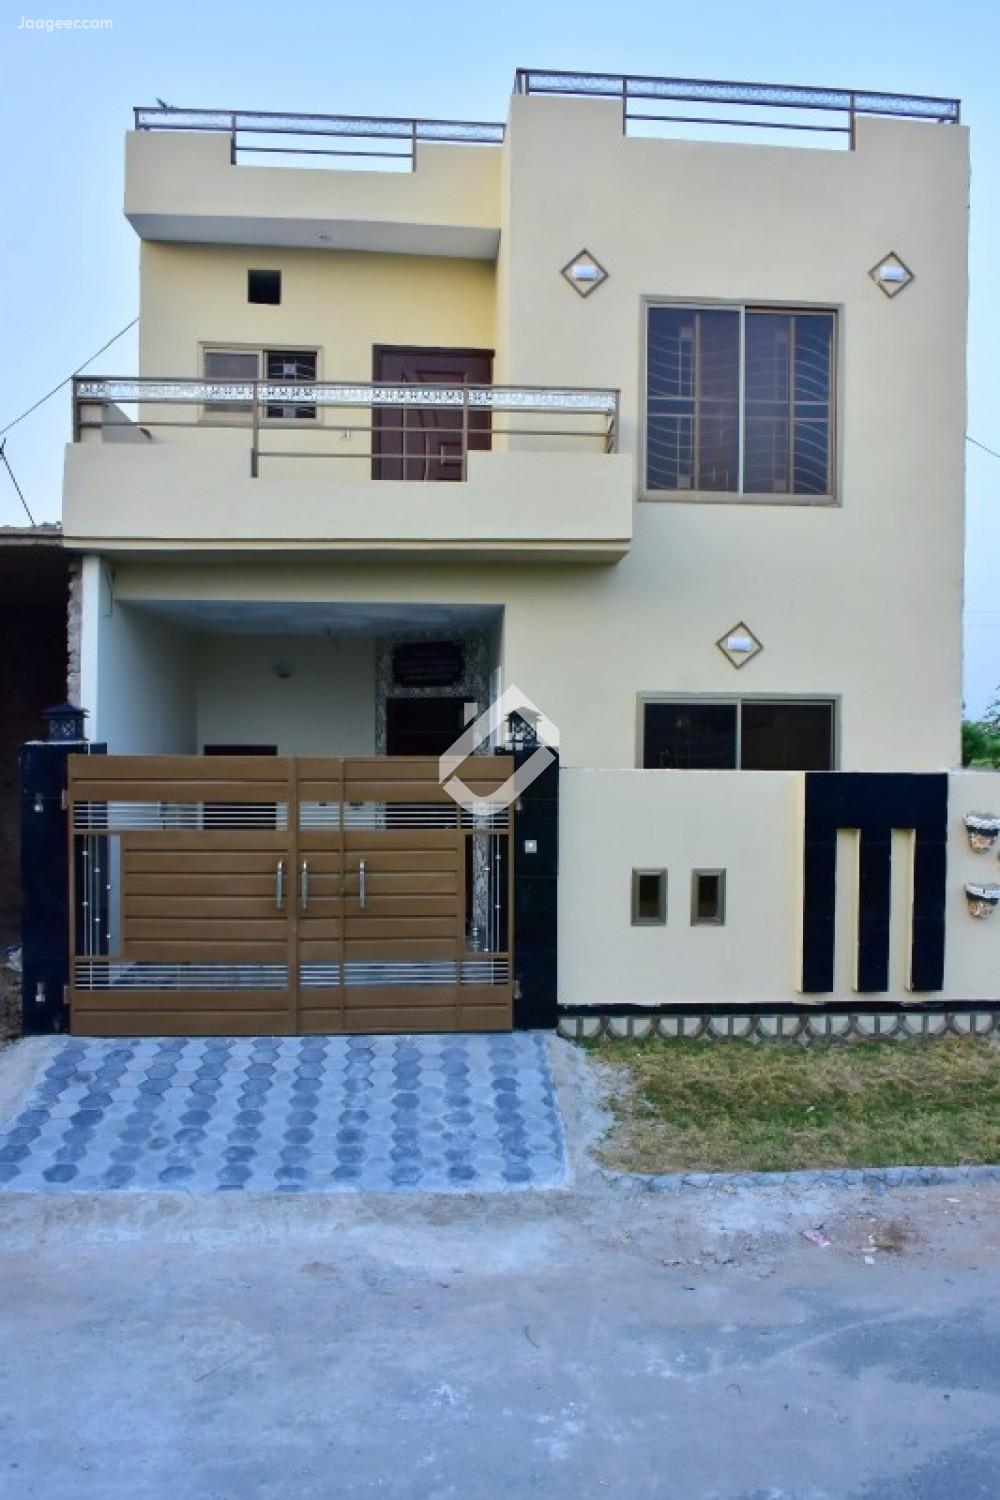 View  5 Marla Double Storey House For Sale In Ghous Garden Phase 1 Near Bypass 88 Jajja Super Market  in Ghous Garden Phase 1, Sargodha